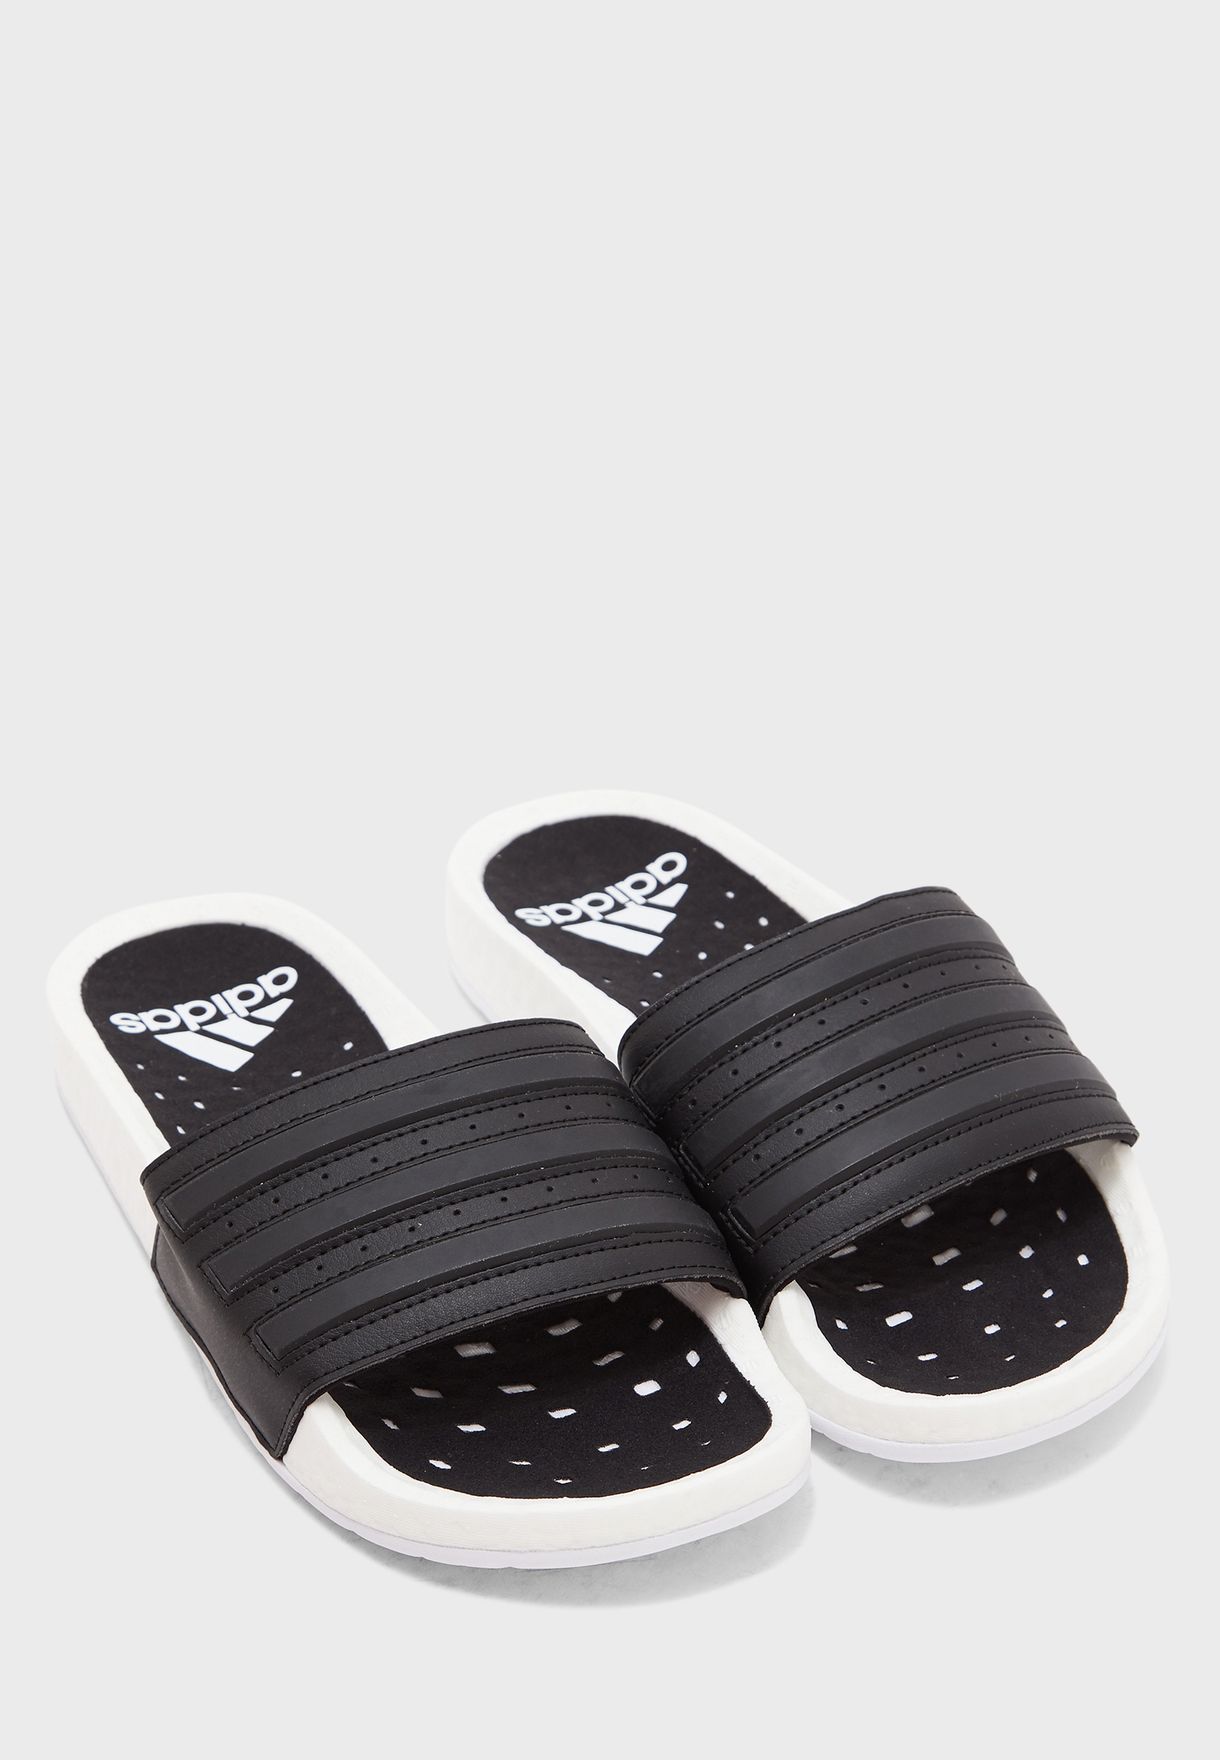 adidas slides with boost